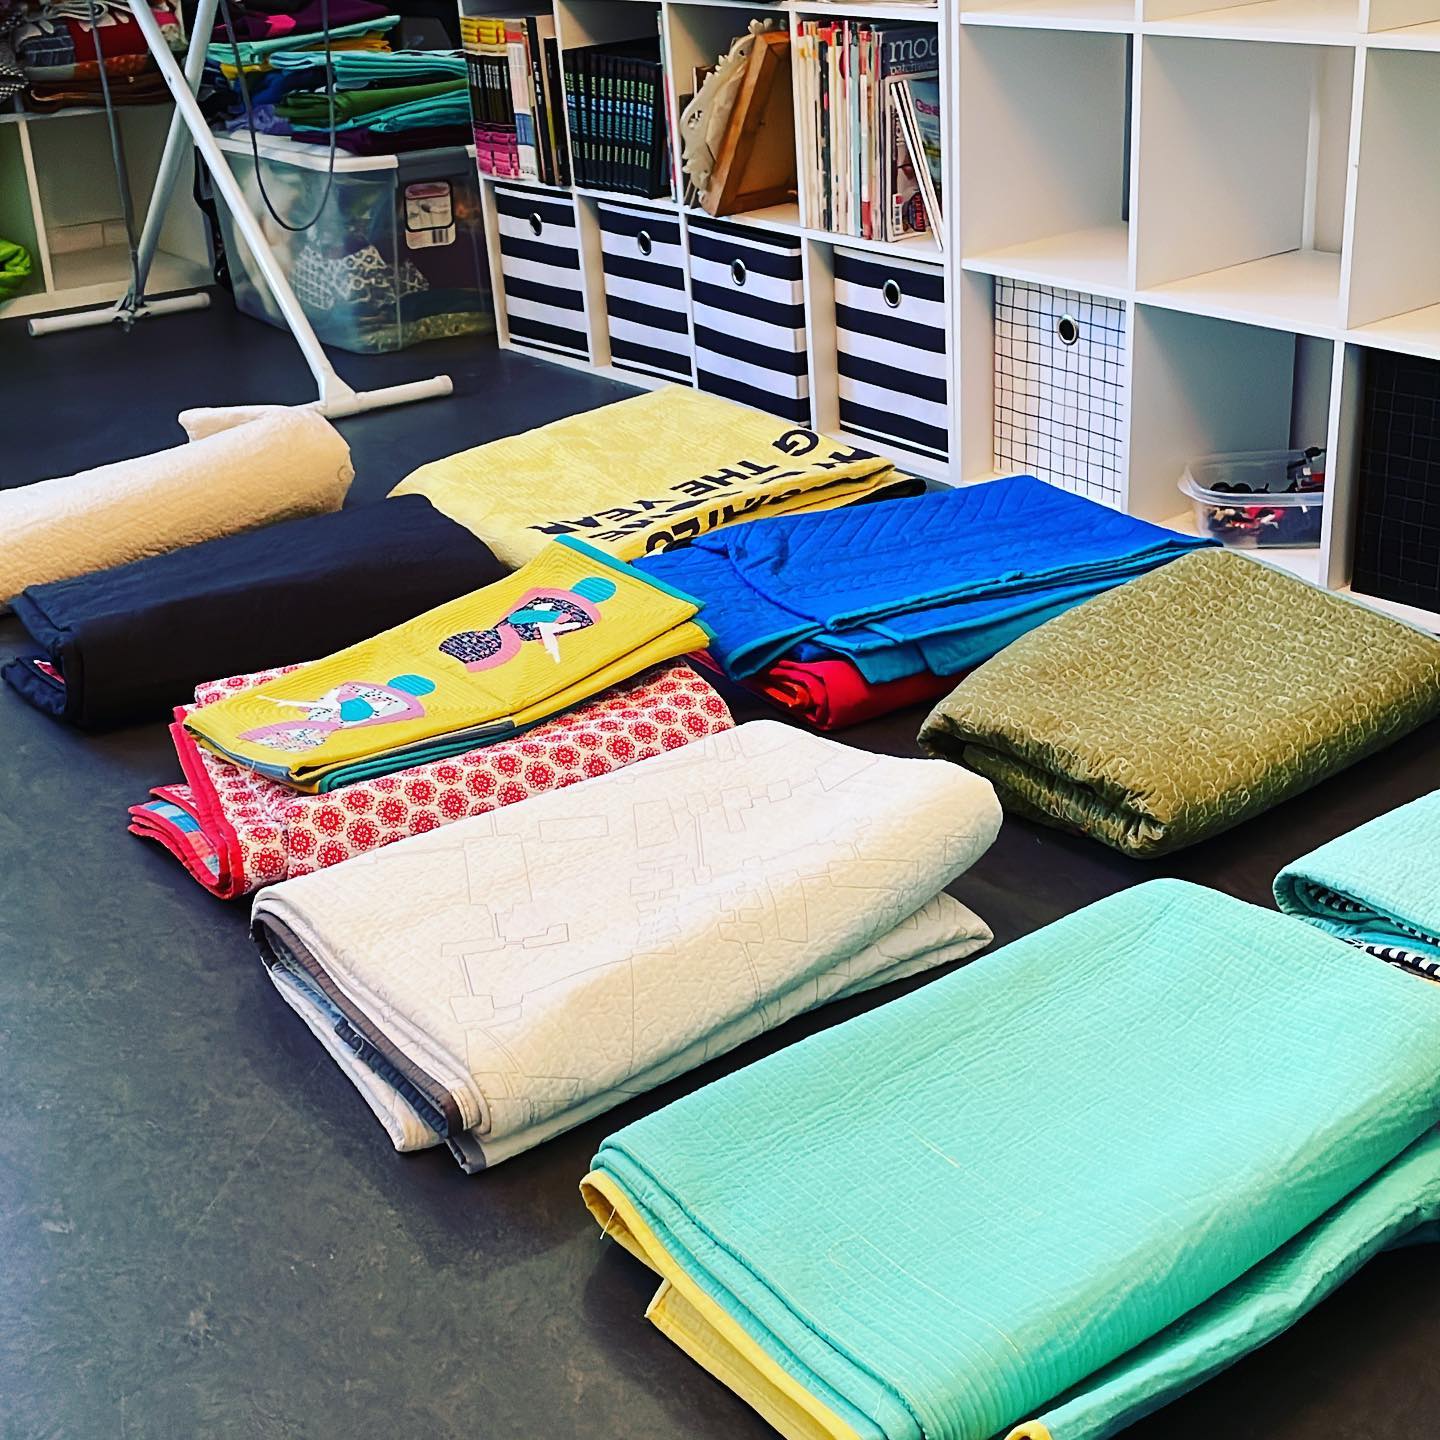 Picking out quilts for an upcoming show. So many to choose from…